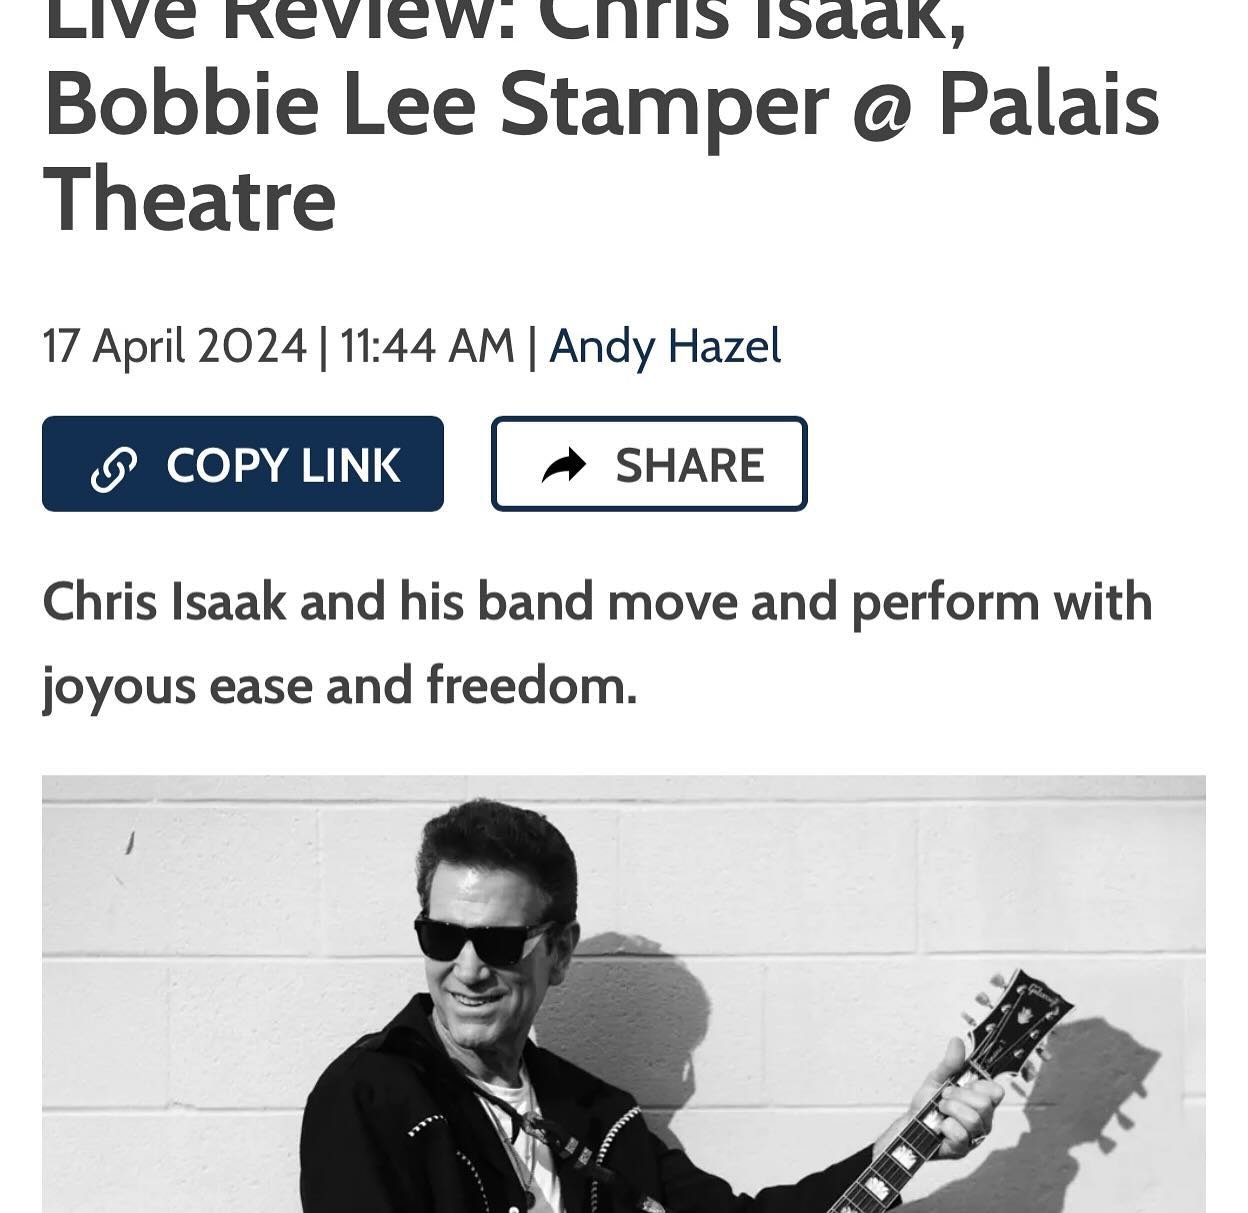 The past couple days were a lot of fun. Thanks to @chrisisaak, his amazing band, the lovely production crew, @livenationaustralia, @palaistheatre and every person who took the time to listen to my songs, to come say hello, laugh at my dumb jokes, tel